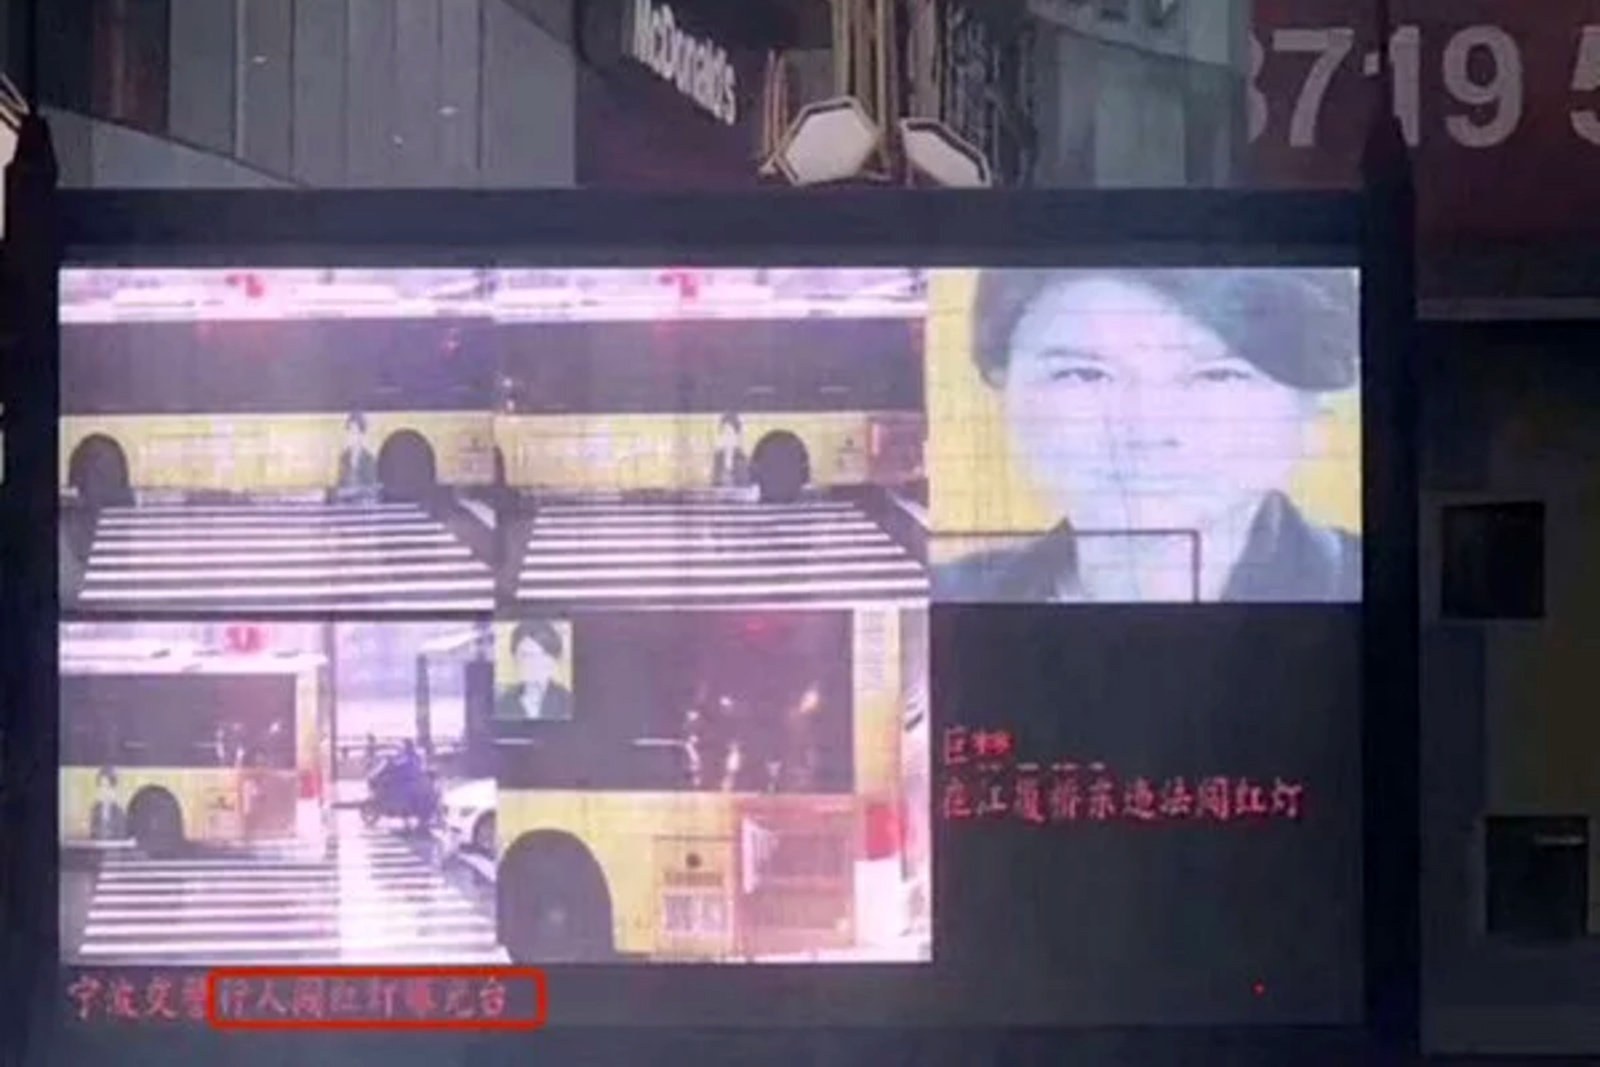 Chinese facial recognition system confuses bus ad for jaywalker